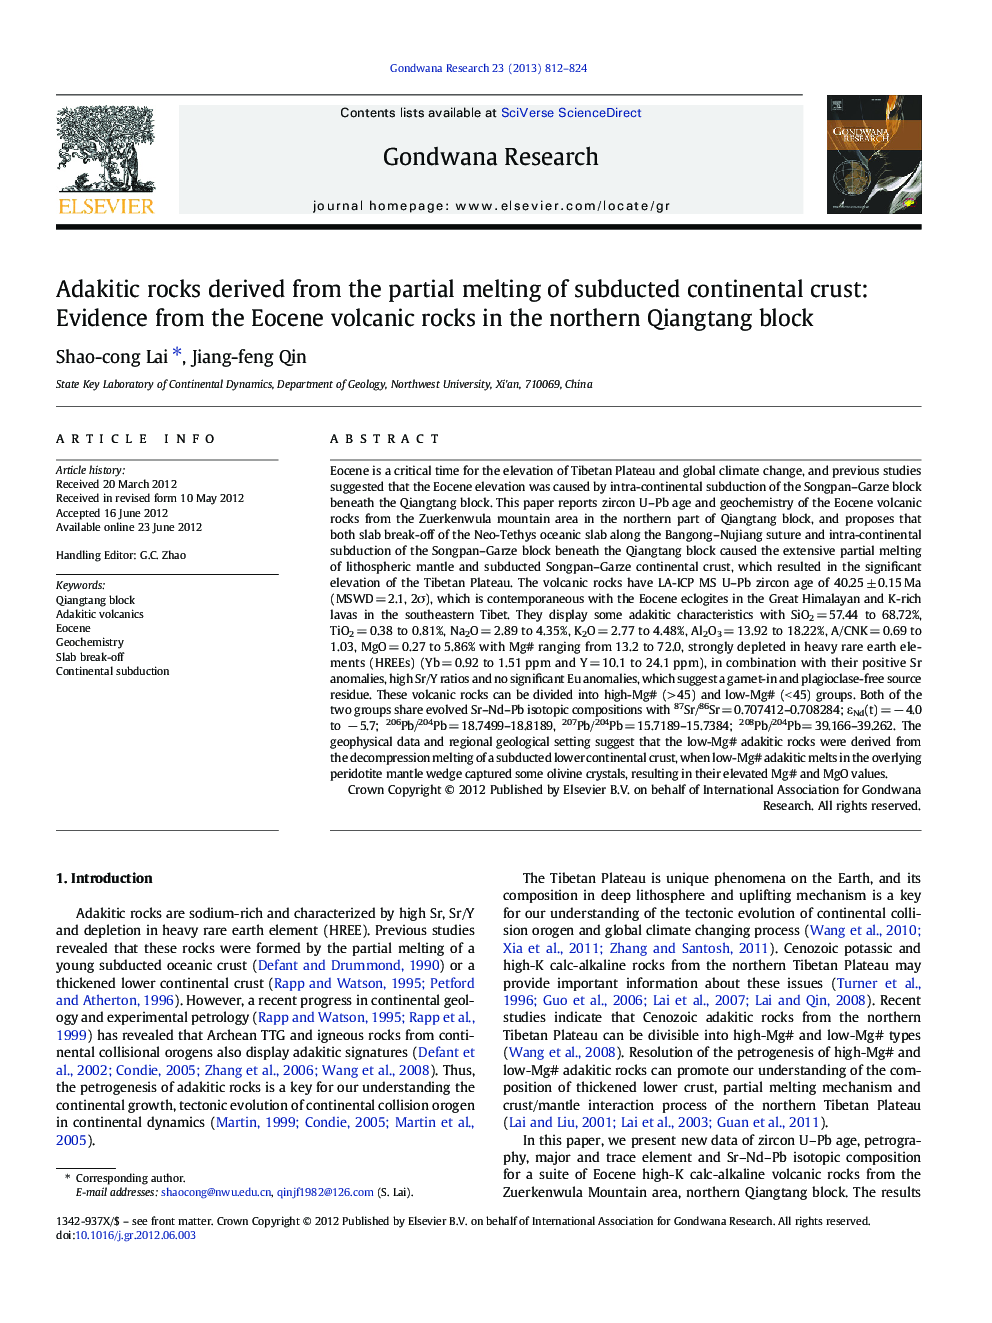 Adakitic rocks derived from the partial melting of subducted continental crust: Evidence from the Eocene volcanic rocks in the northern Qiangtang block